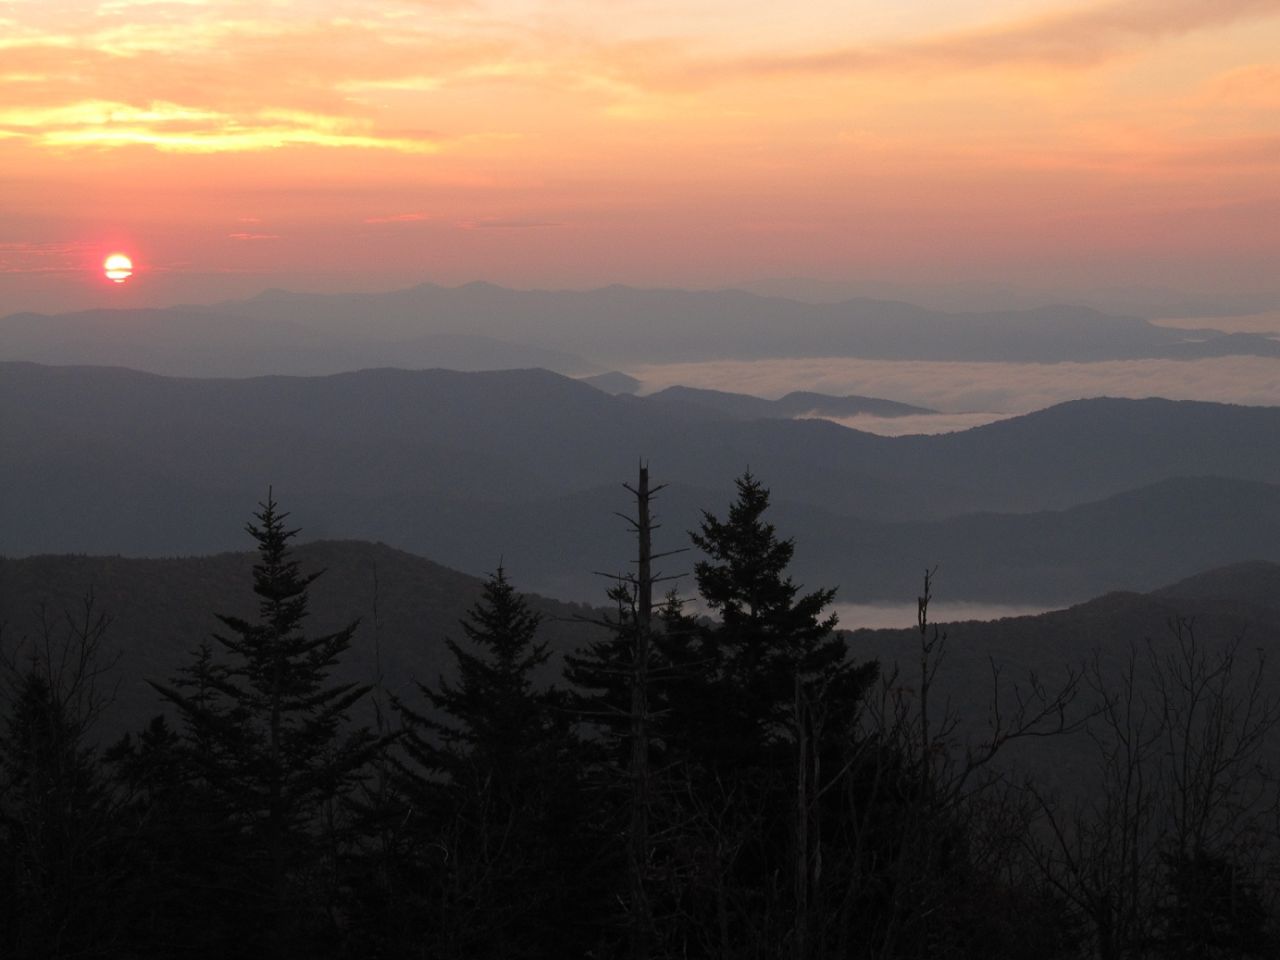 Great Smoky Mountains National Park is the <a href="http://home.nps.gov/news/release.htm?id=1457" target="_blank" target="_blank">most visited National Park in the country</a>, with 9.7 million visitors last year.